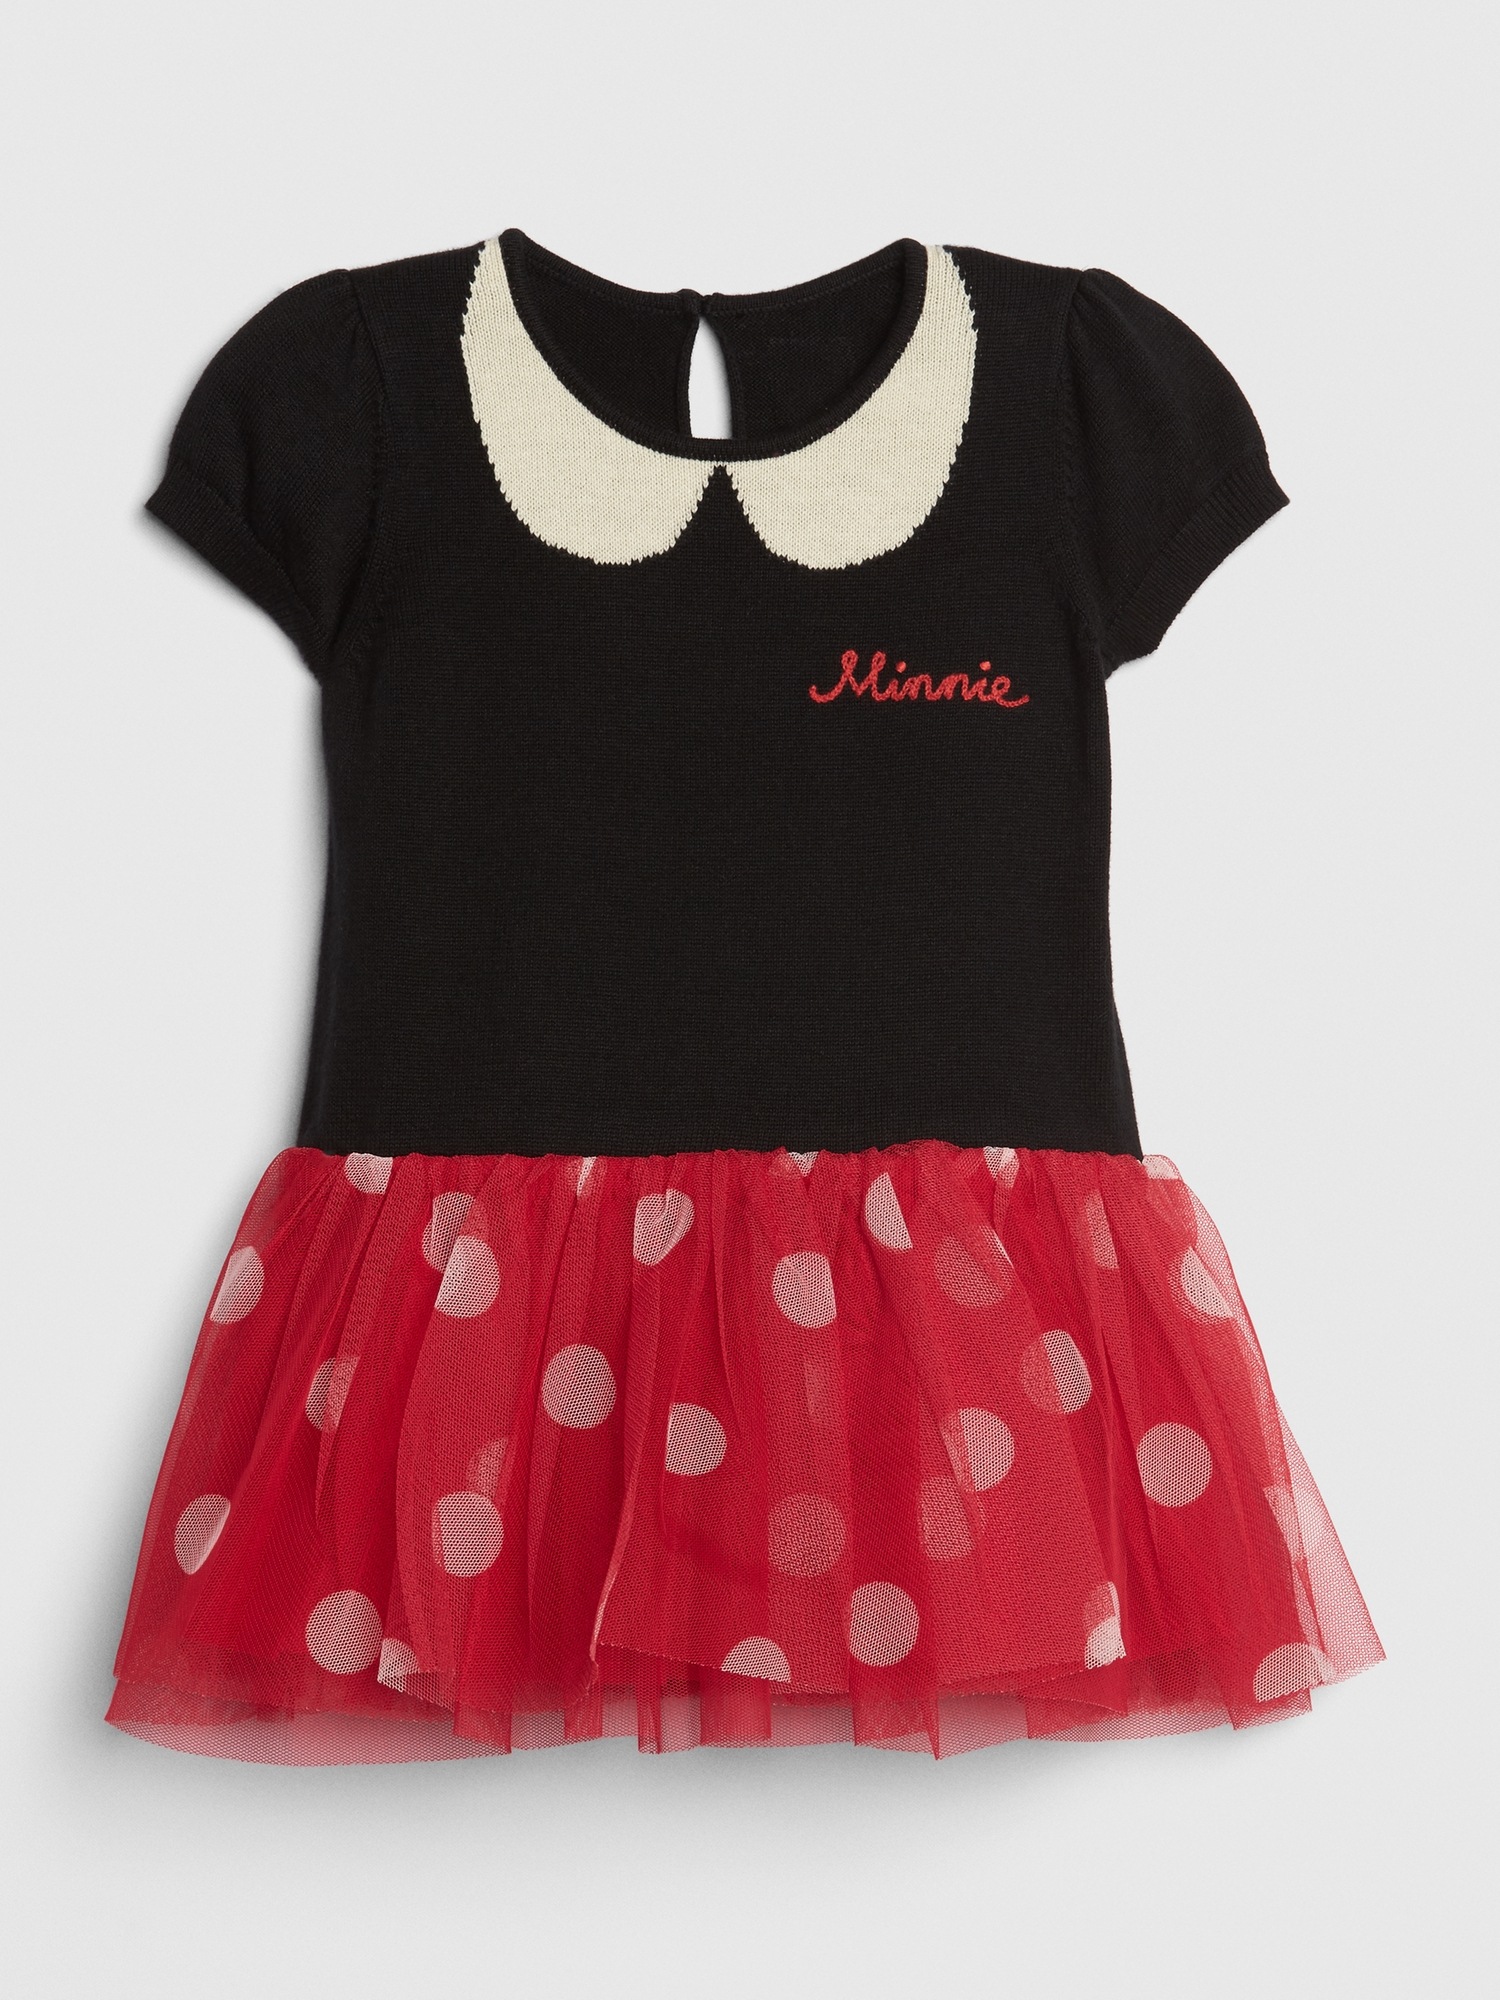 minnie mouse clothes for babies